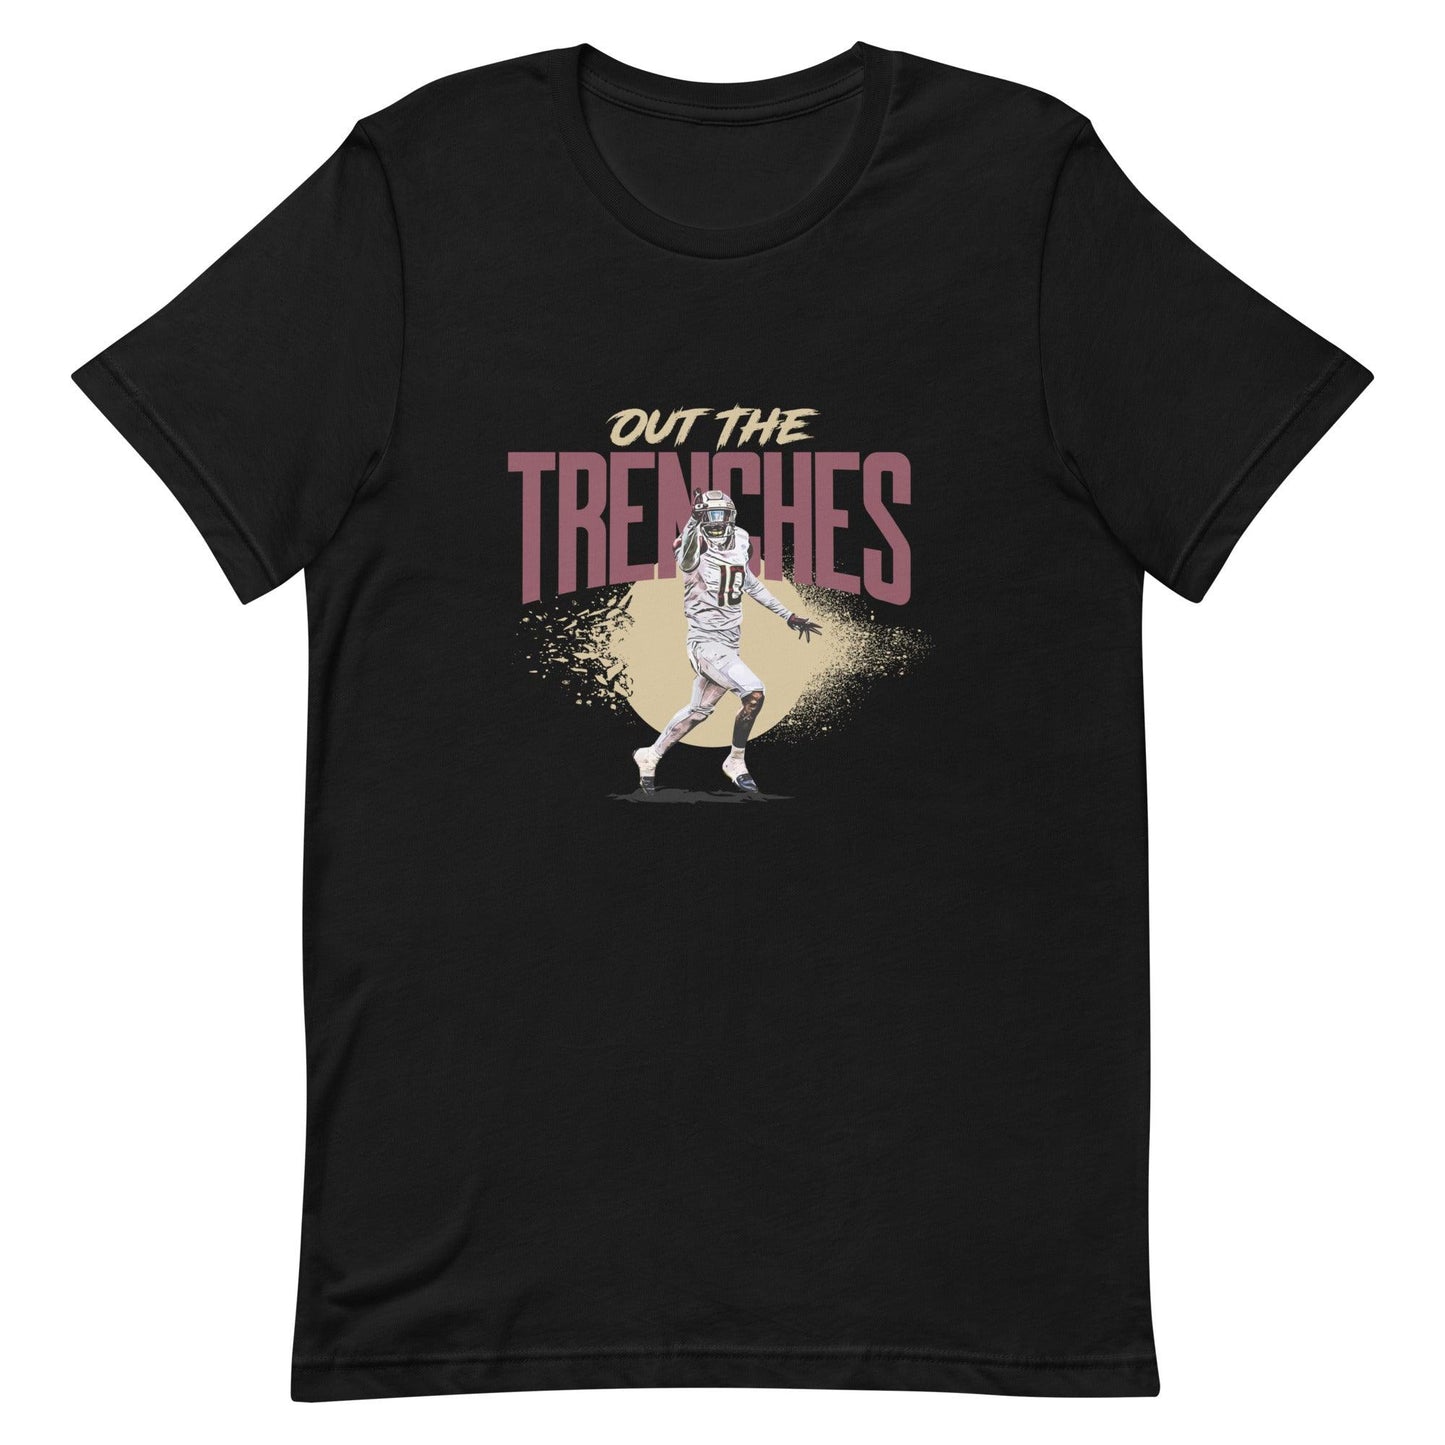 Jammie Robinson "Out The Trenches" t-shirt - Fan Arch